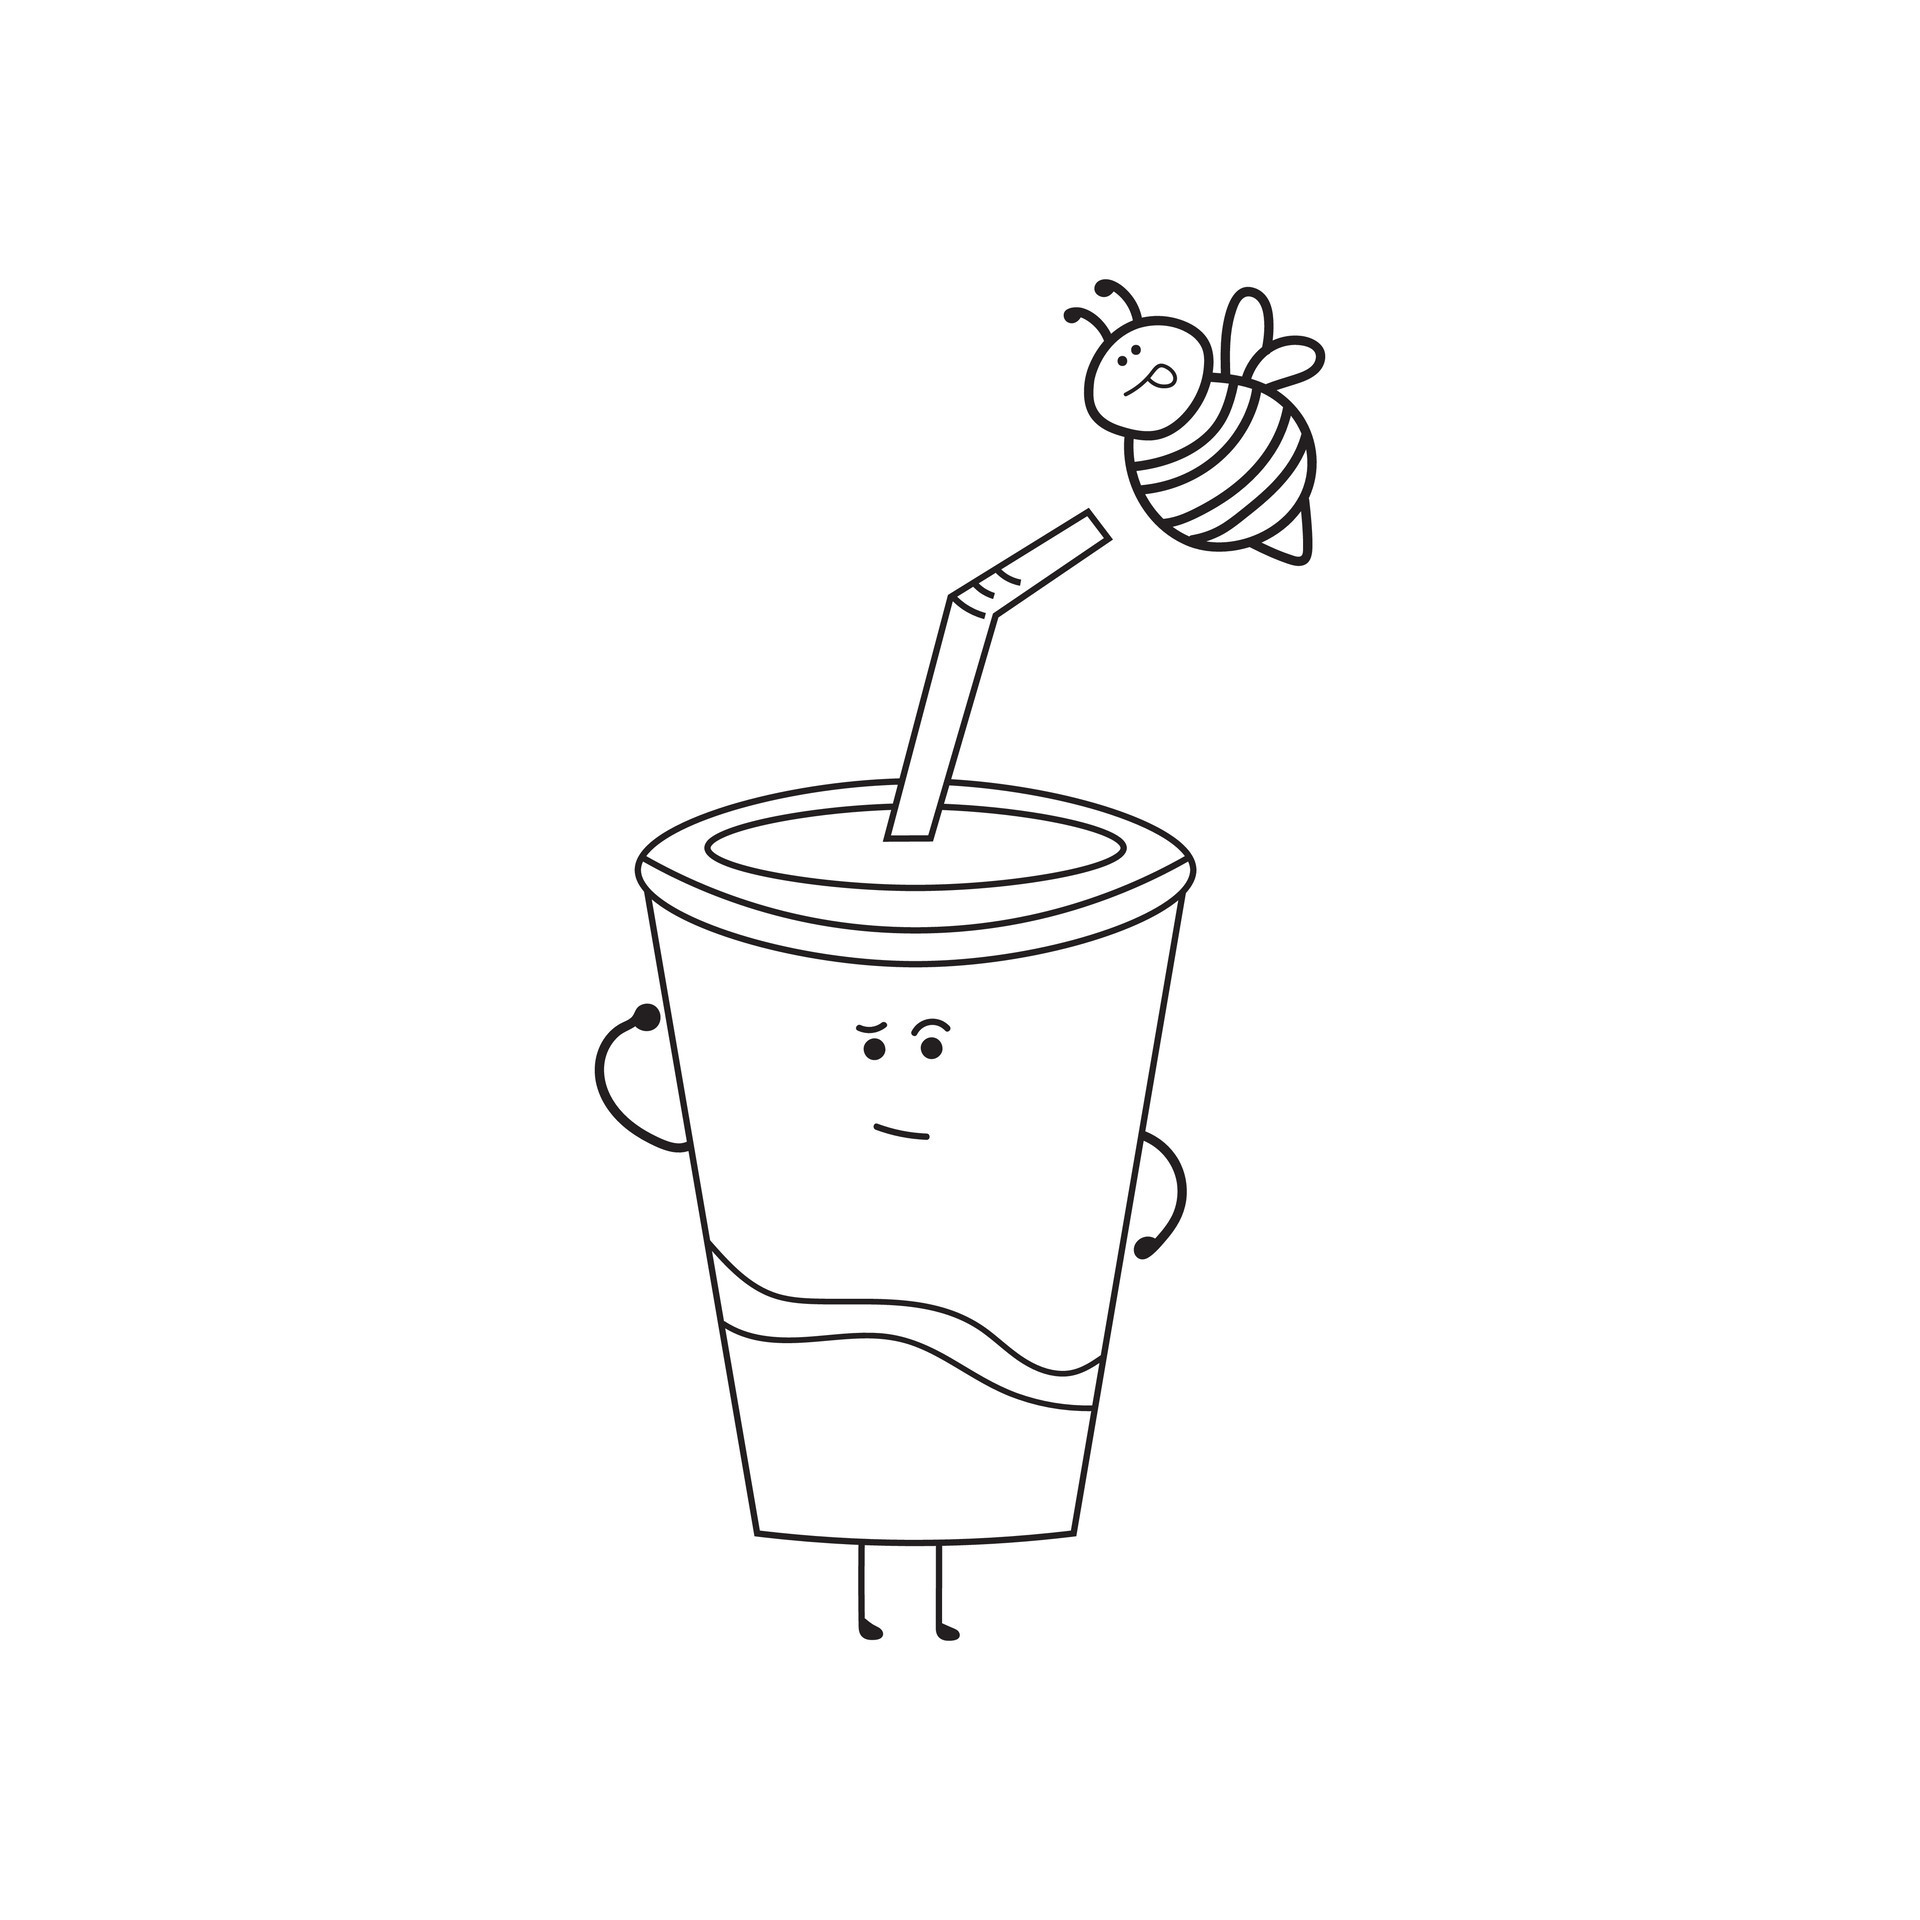 https://static.vecteezy.com/system/resources/previews/025/434/780/original/hand-drawn-illustration-graphic-kids-drawing-style-funny-cute-red-cup-drink-with-little-bee-perched-on-its-straw-in-a-cartoon-style-vector.jpg